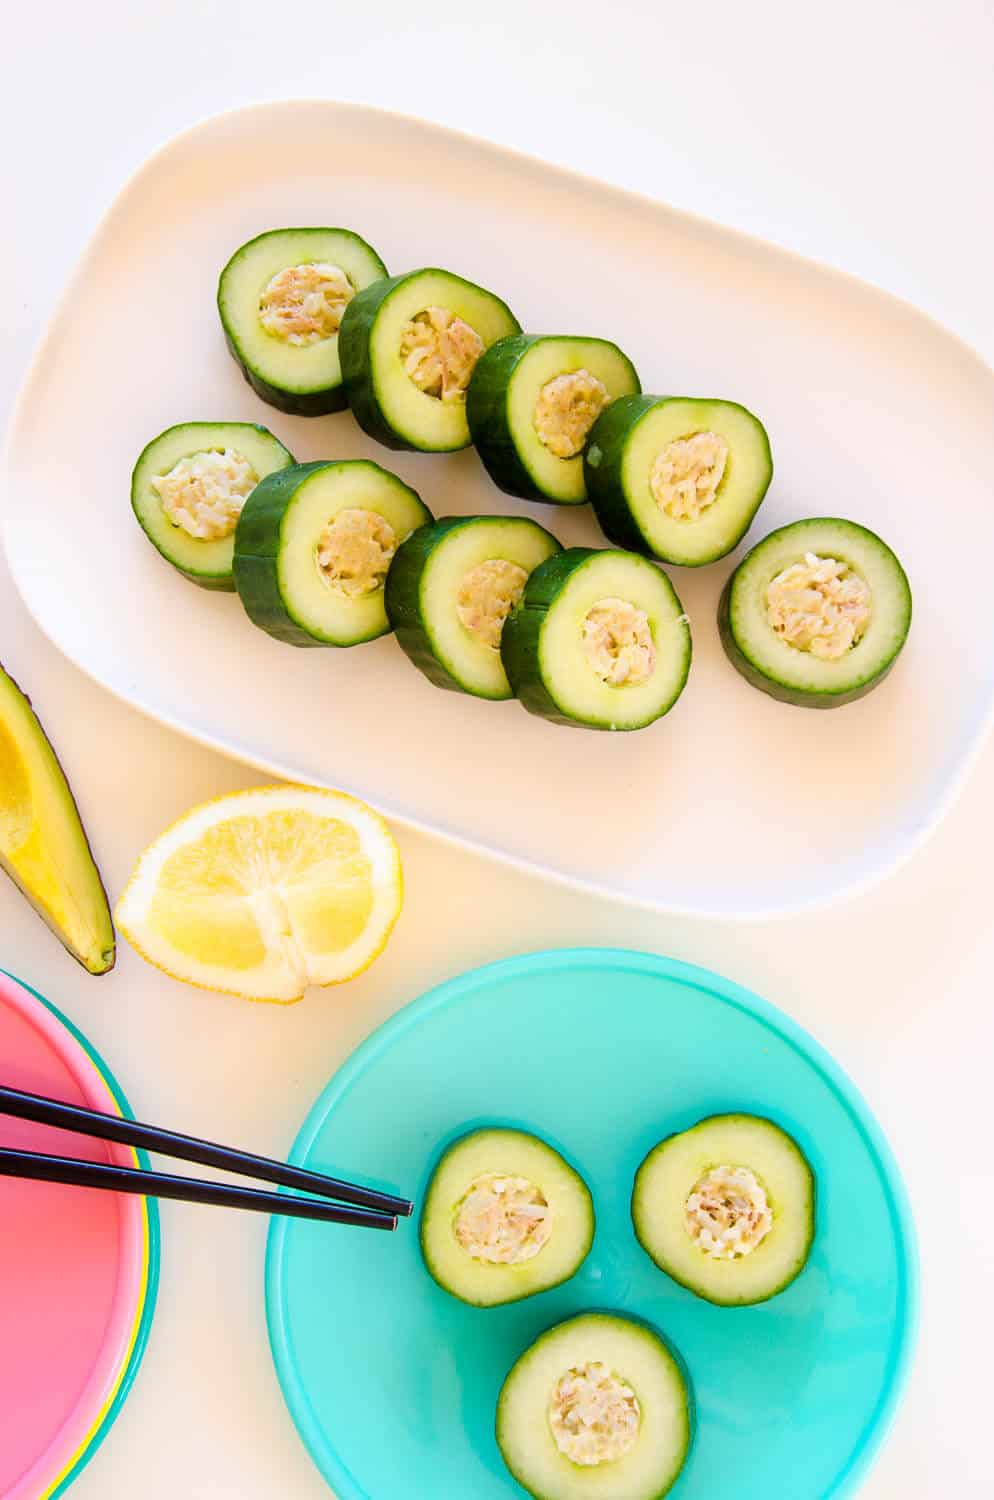 Table laid out with a platter of cucumber sushi, lemon slices, avocado and colourful plates